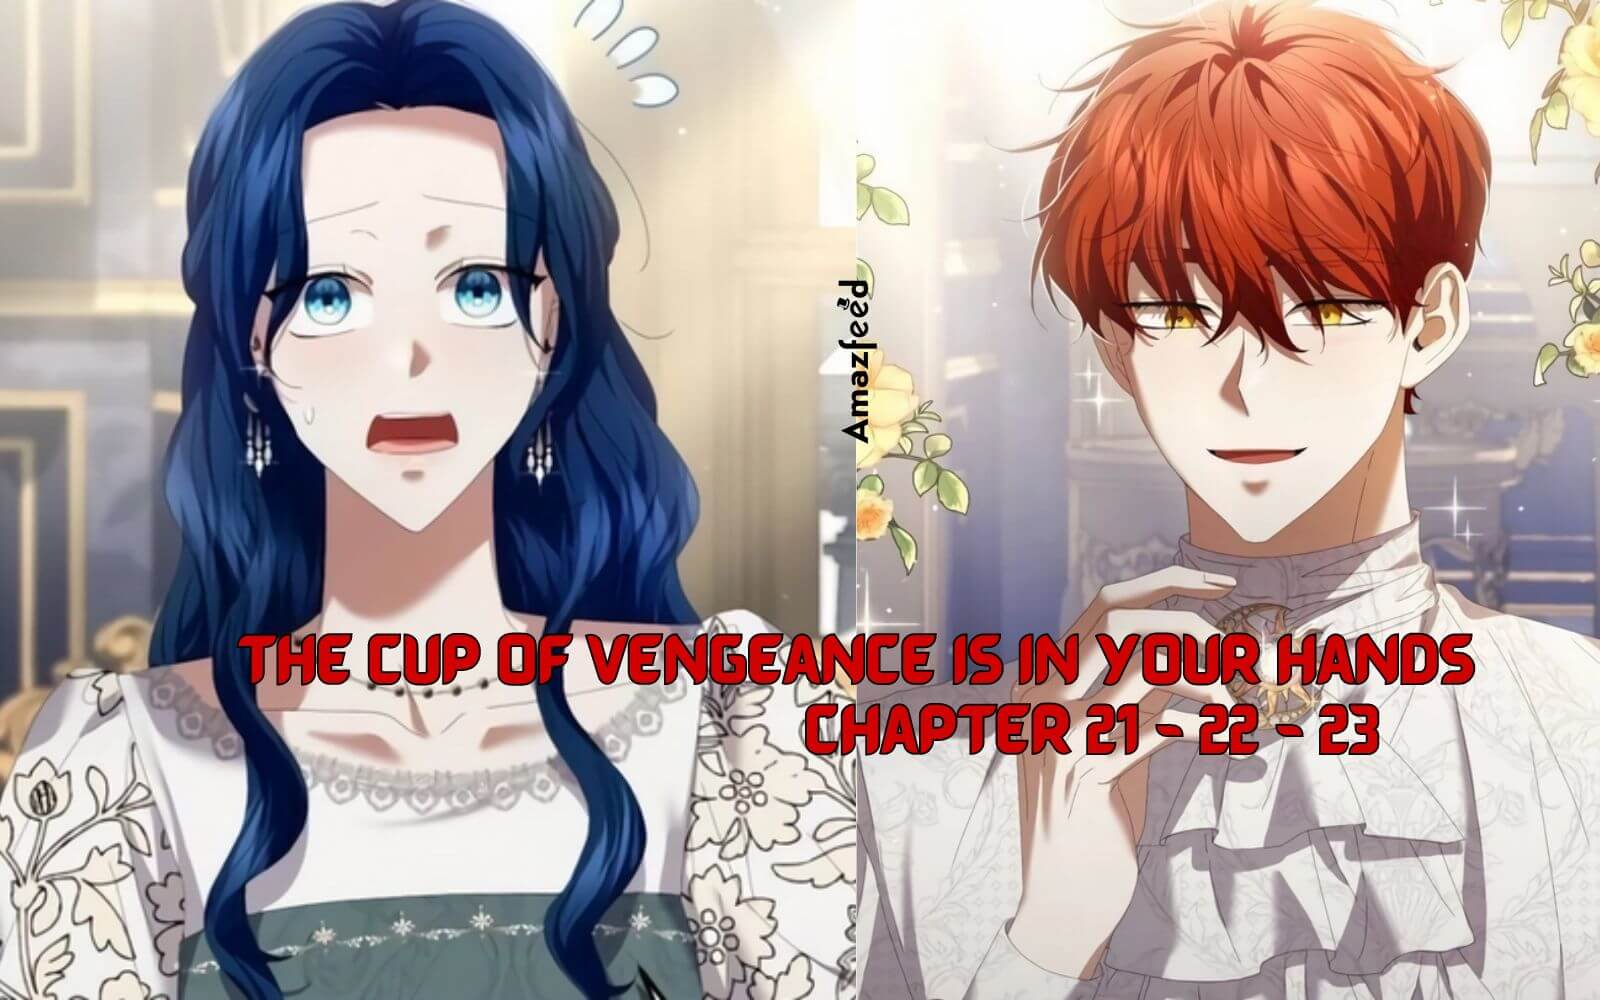 The Cup Of Vengeance Is In Your Hands Chapter 21 - 22 - 23